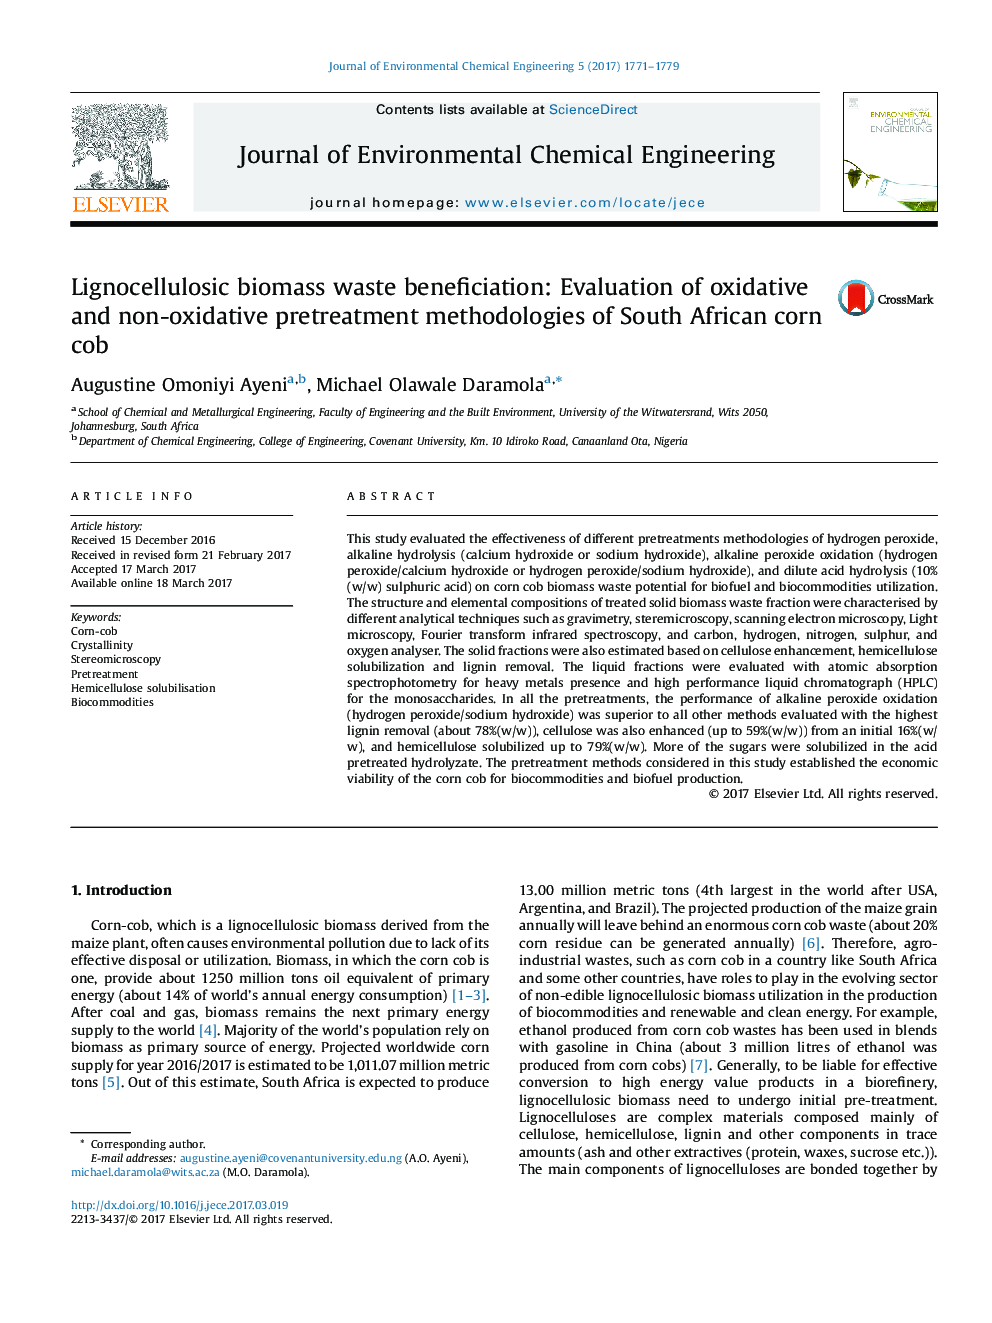 Lignocellulosic biomass waste beneficiation: Evaluation of oxidative and non-oxidative pretreatment methodologies of South African corn cob